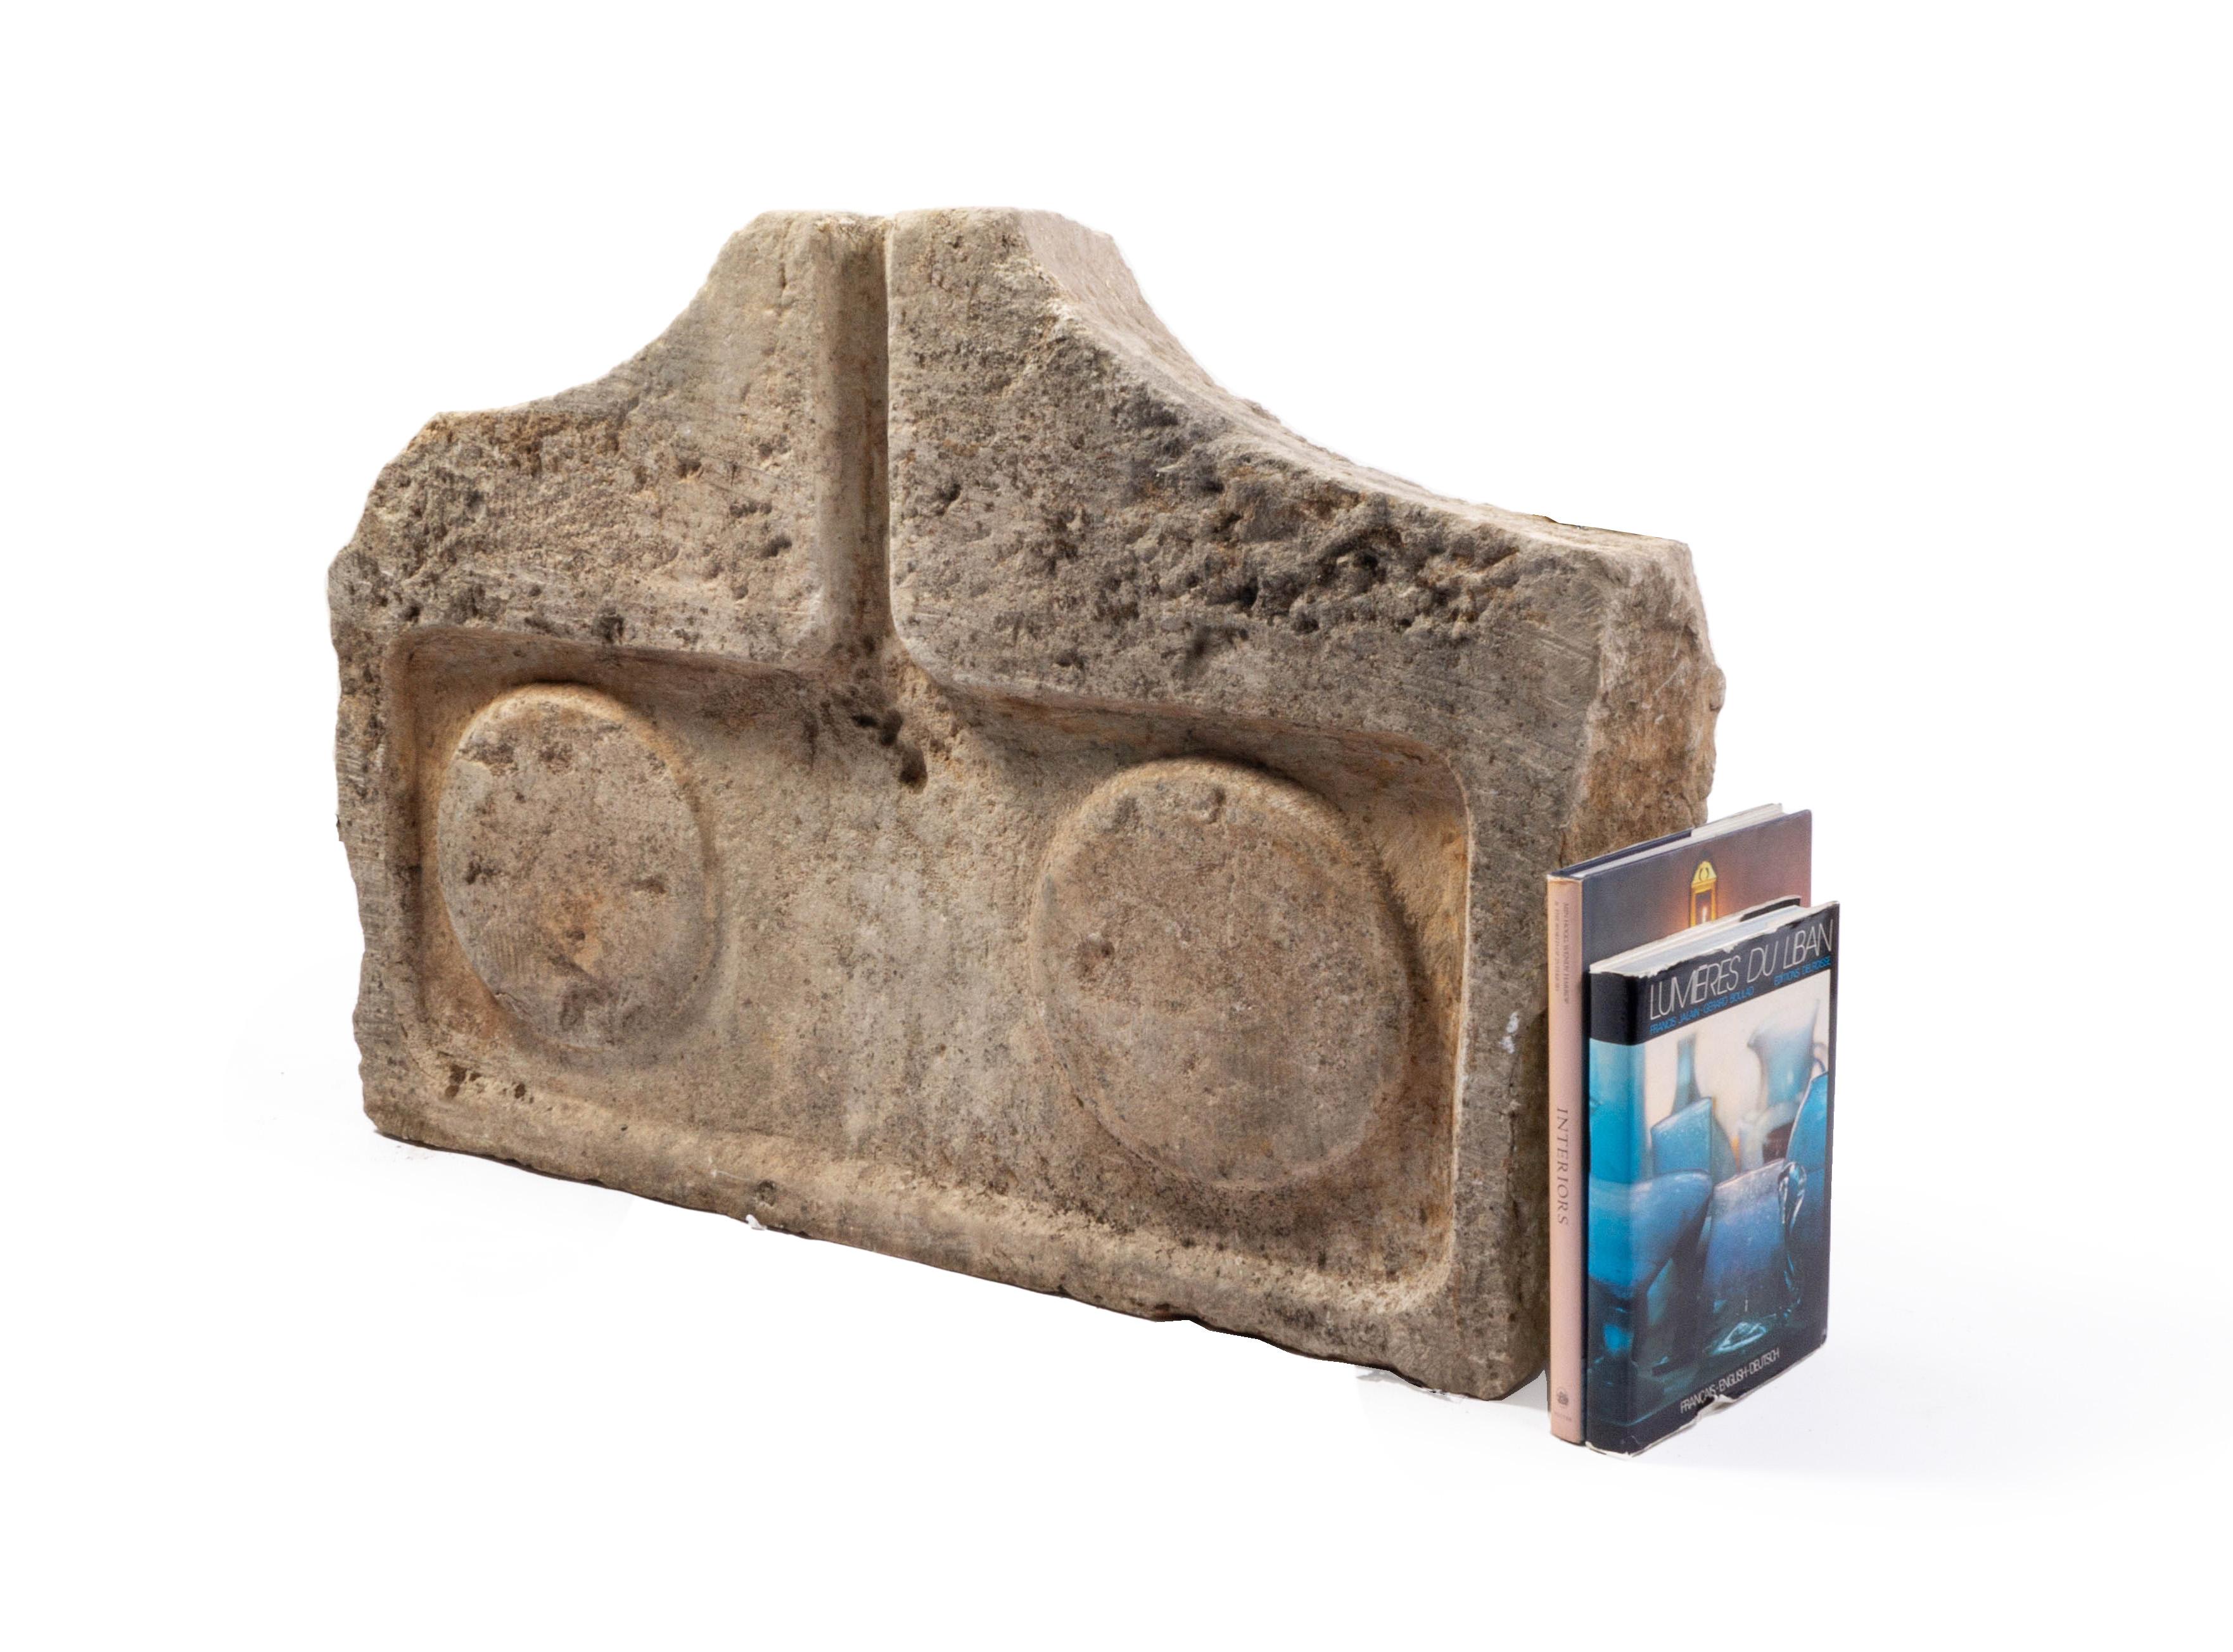 Antique French Limestone Apple Press.

This piece is a part of Brendan Bass’s one-of-a-kind collection, Le Monde. French for “The World”, the Le Monde collection is made up of rare and hard-to-find pieces curated by Brendan from estate sales,